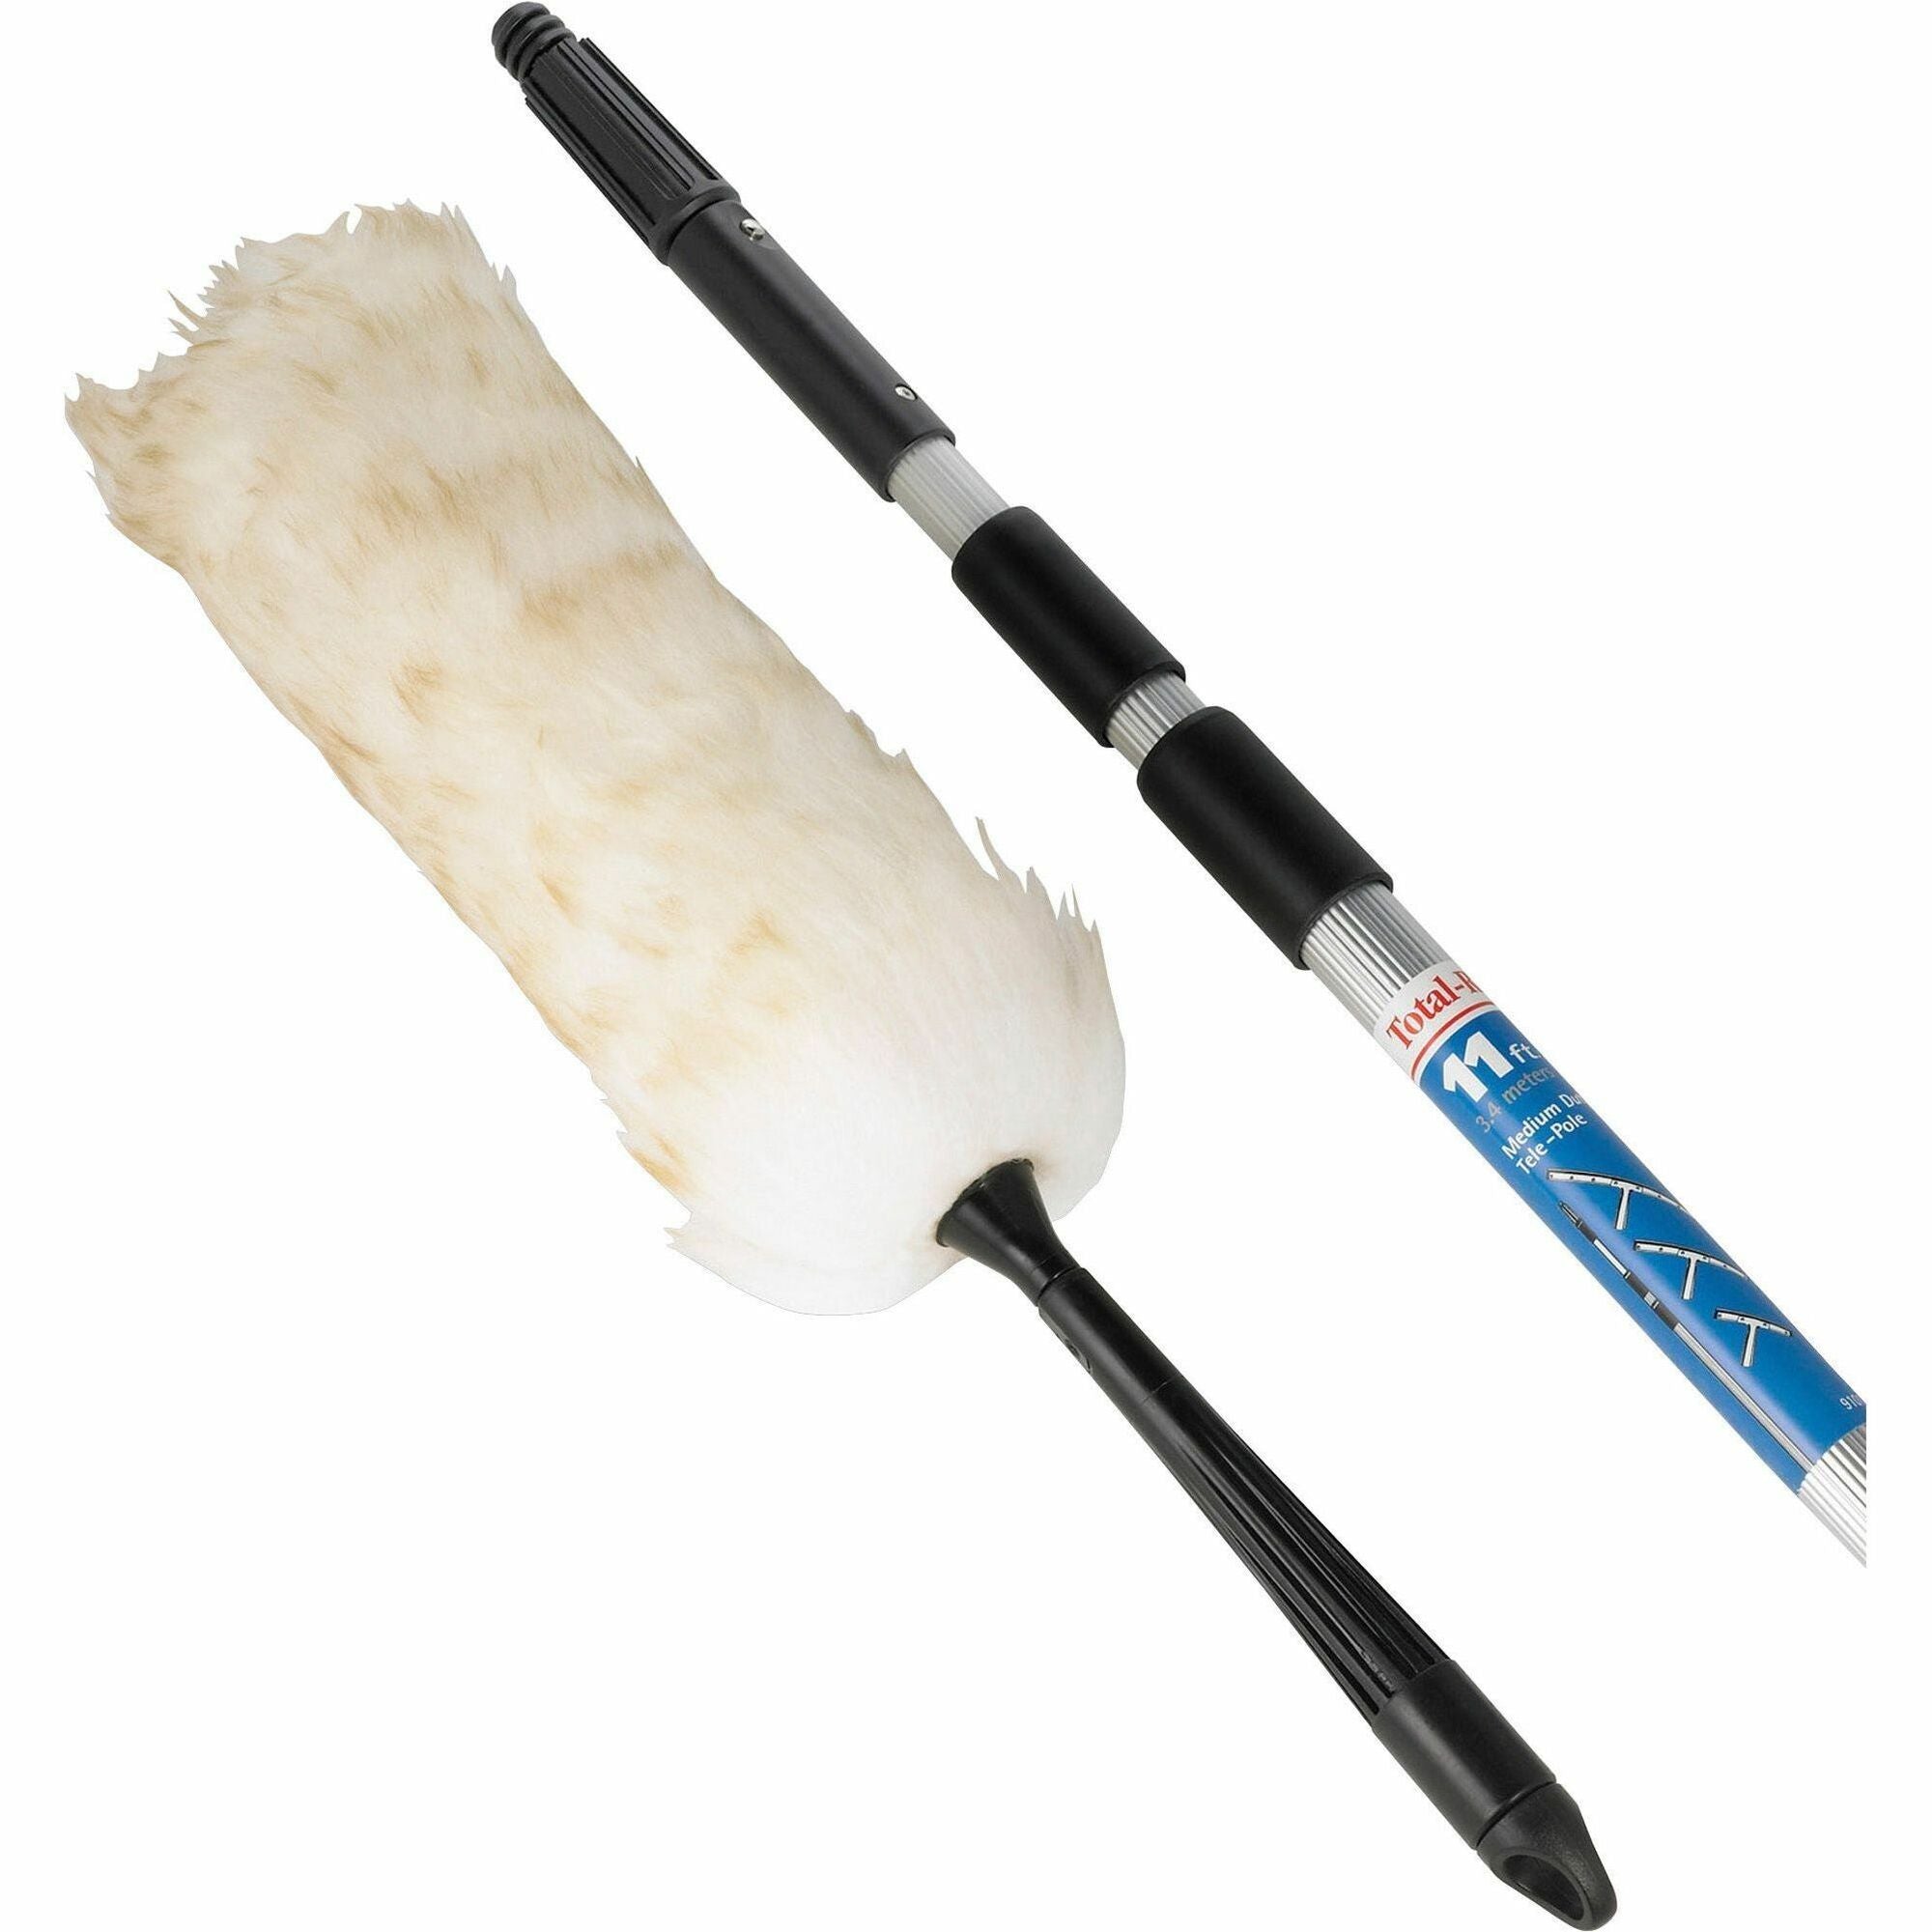 Unger Duster Telescoping Pole Kit - Lamb's Wool Bristle - 52" Overall Length - 1 Each - Cream - 